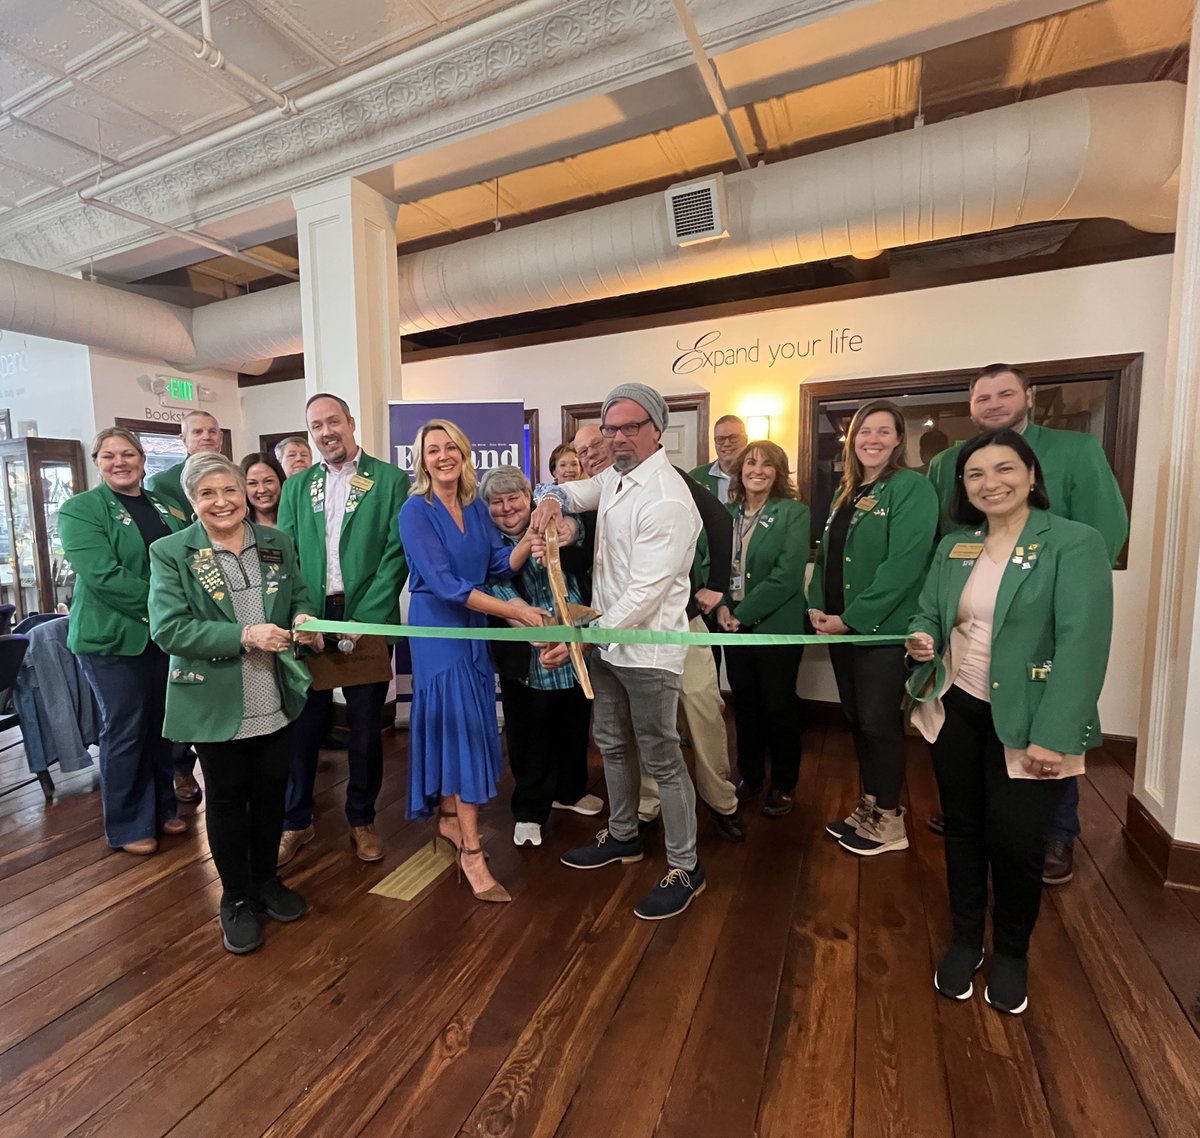 Stacie Anderson and her team at Expand 'formerly Siouxland Magazine' cut the ribbon to celebrate their rebrand. Read their March issue here: expand2more.com.